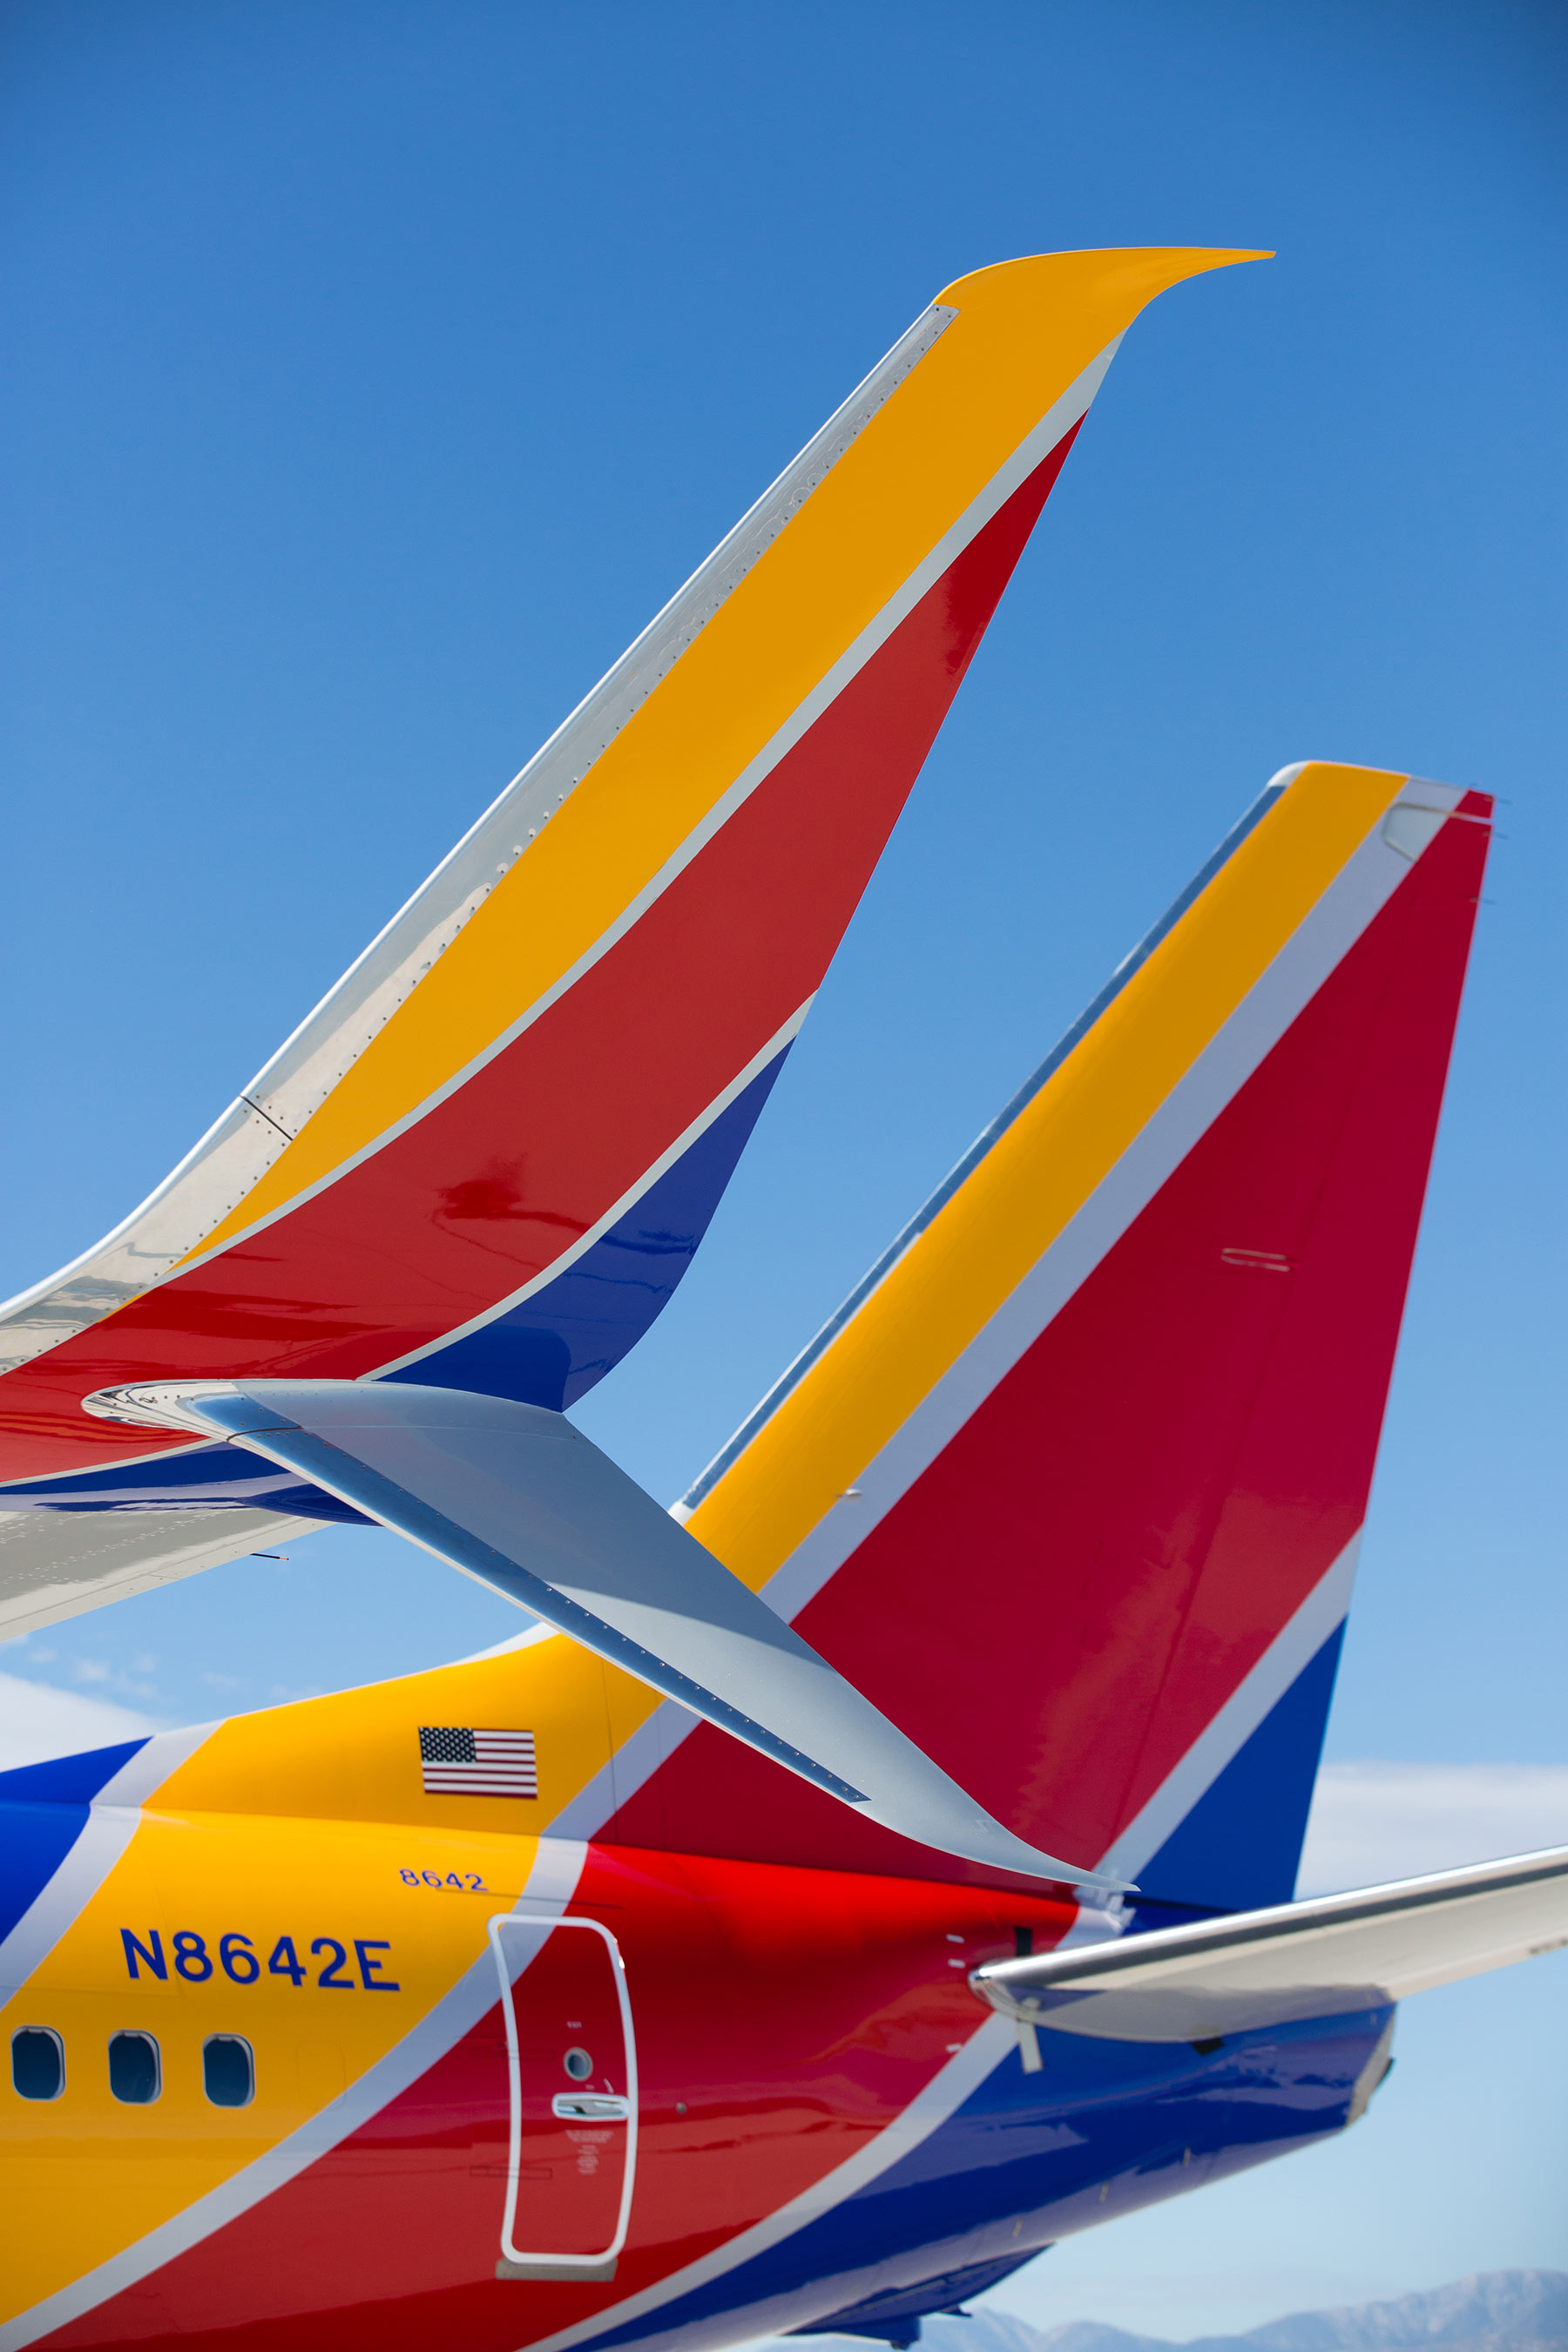 SOUTHWEST AIRLINES UNVEILS ITS NEW LOOK, SAME HEART